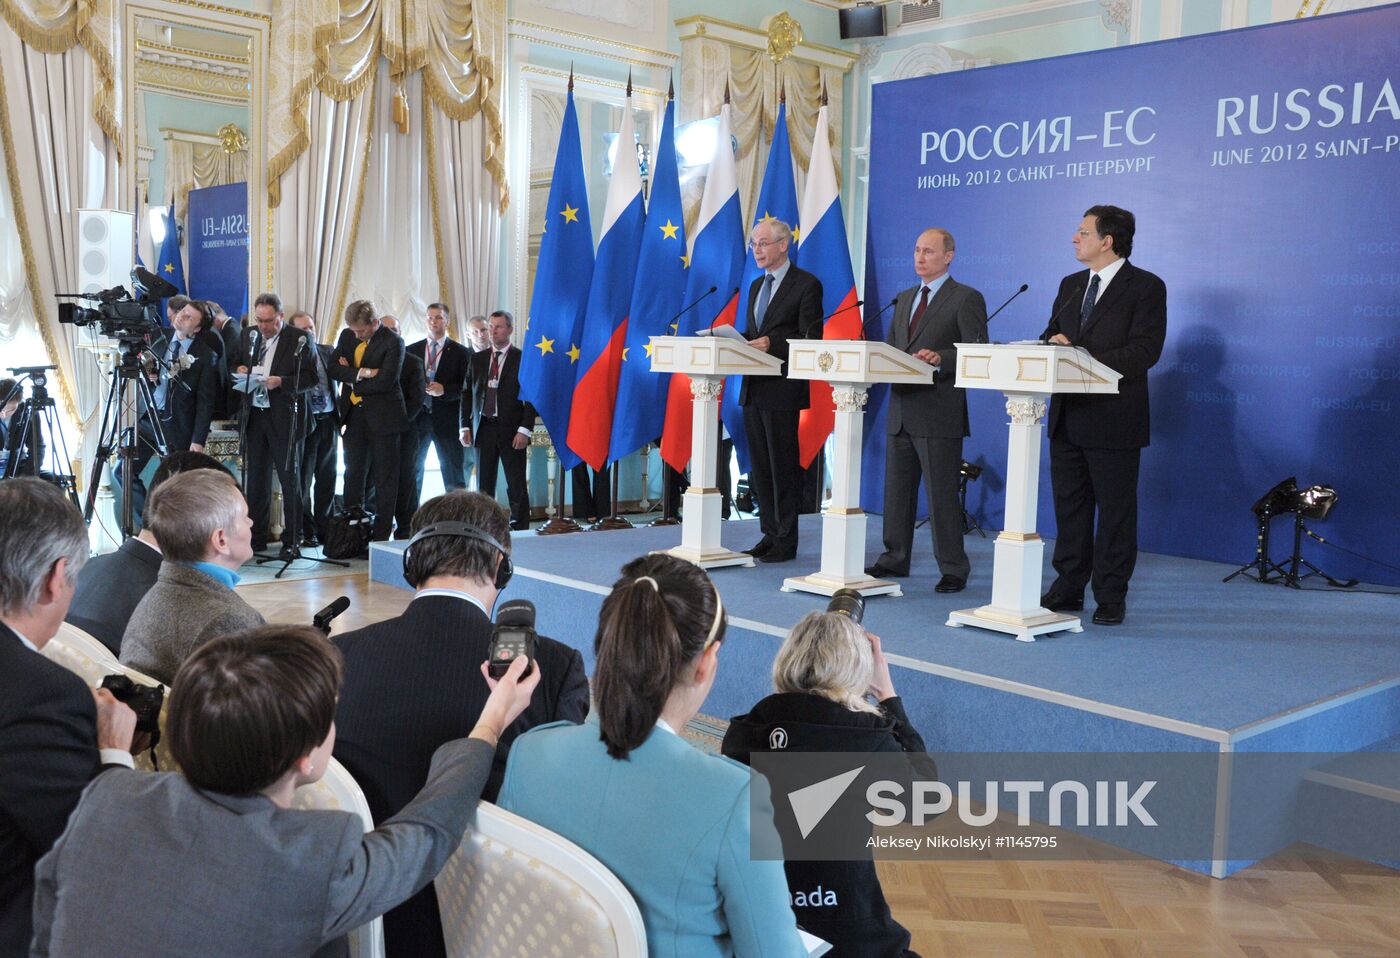 Russia-EU summit joint press conference